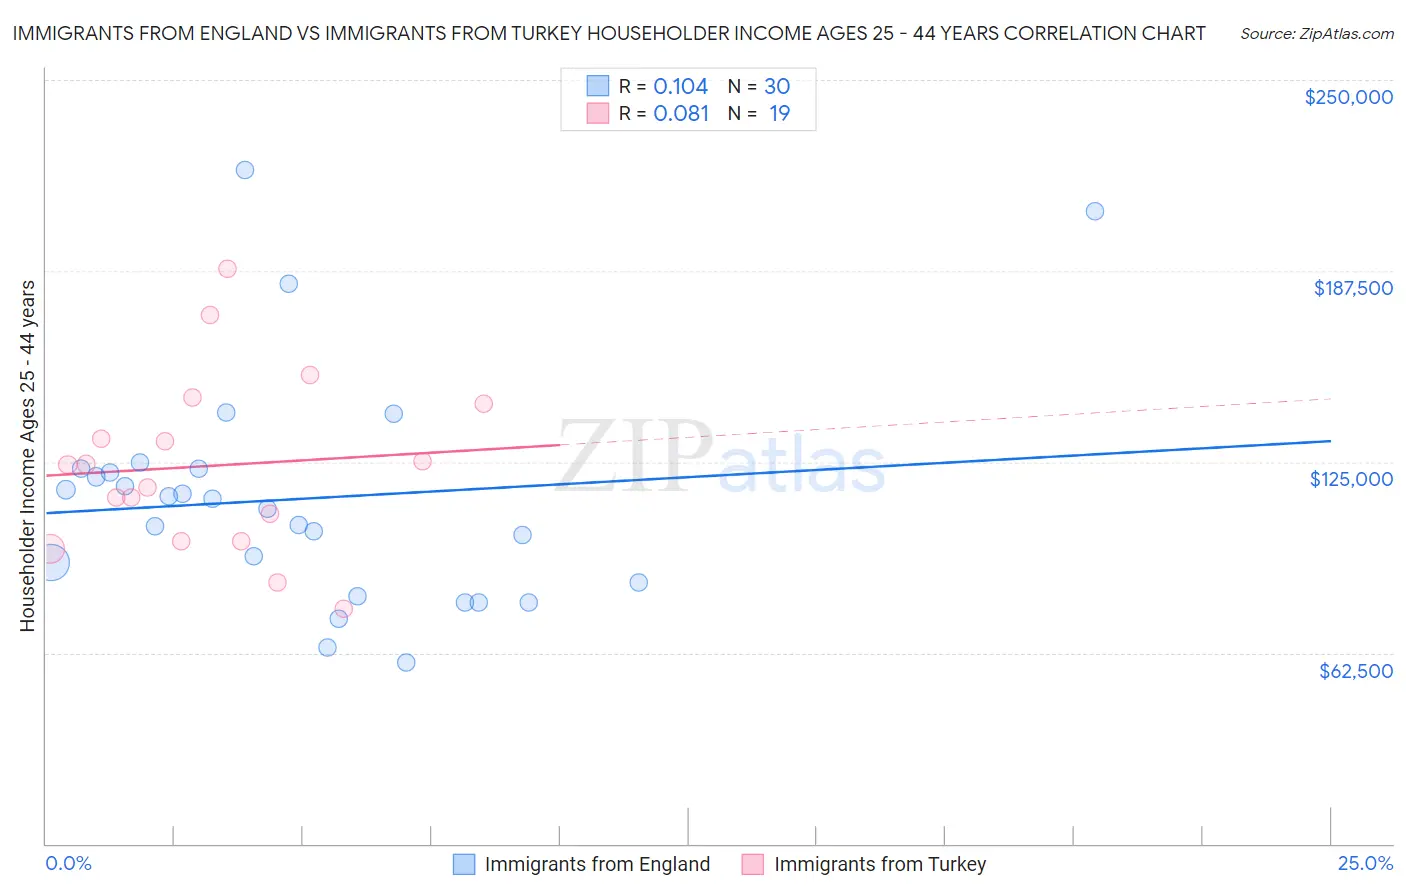 Immigrants from England vs Immigrants from Turkey Householder Income Ages 25 - 44 years